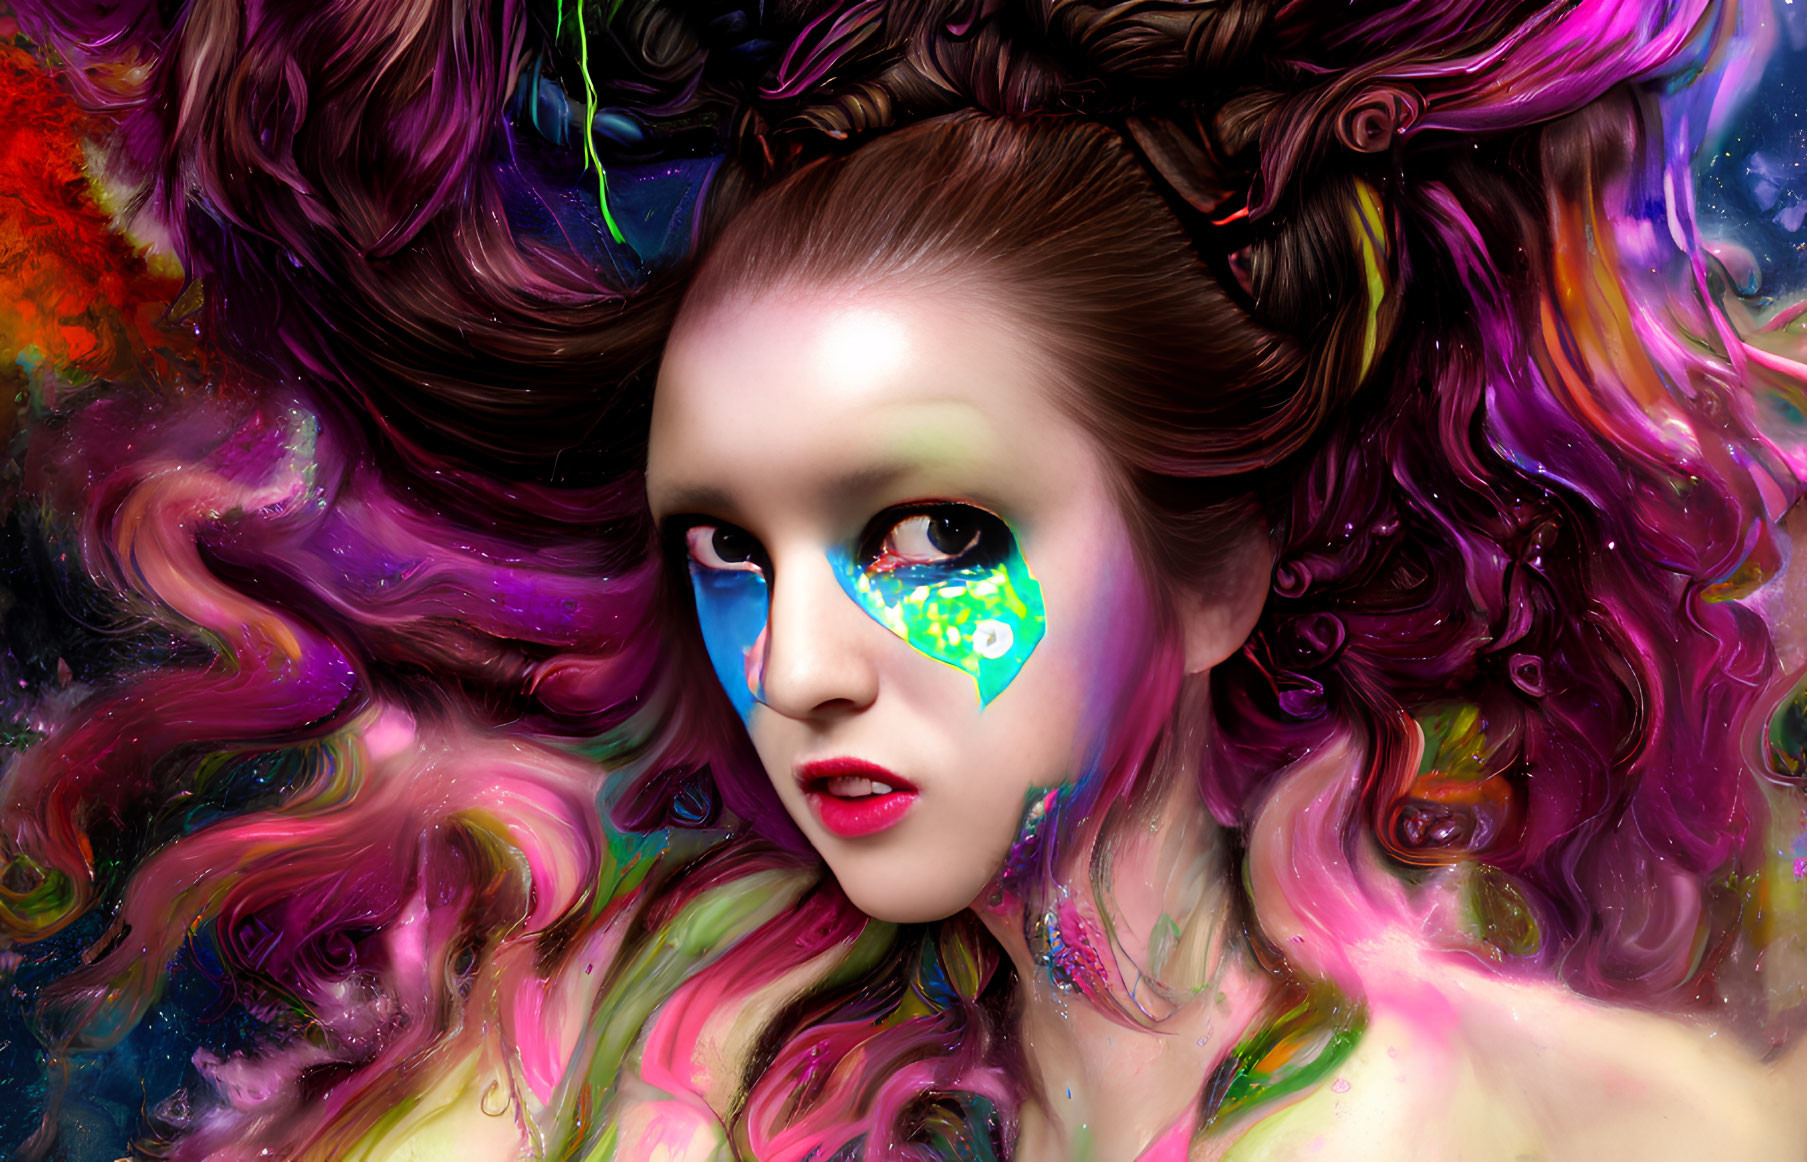 Colorful artwork of a woman with swirling hair and makeup in blue and green tones